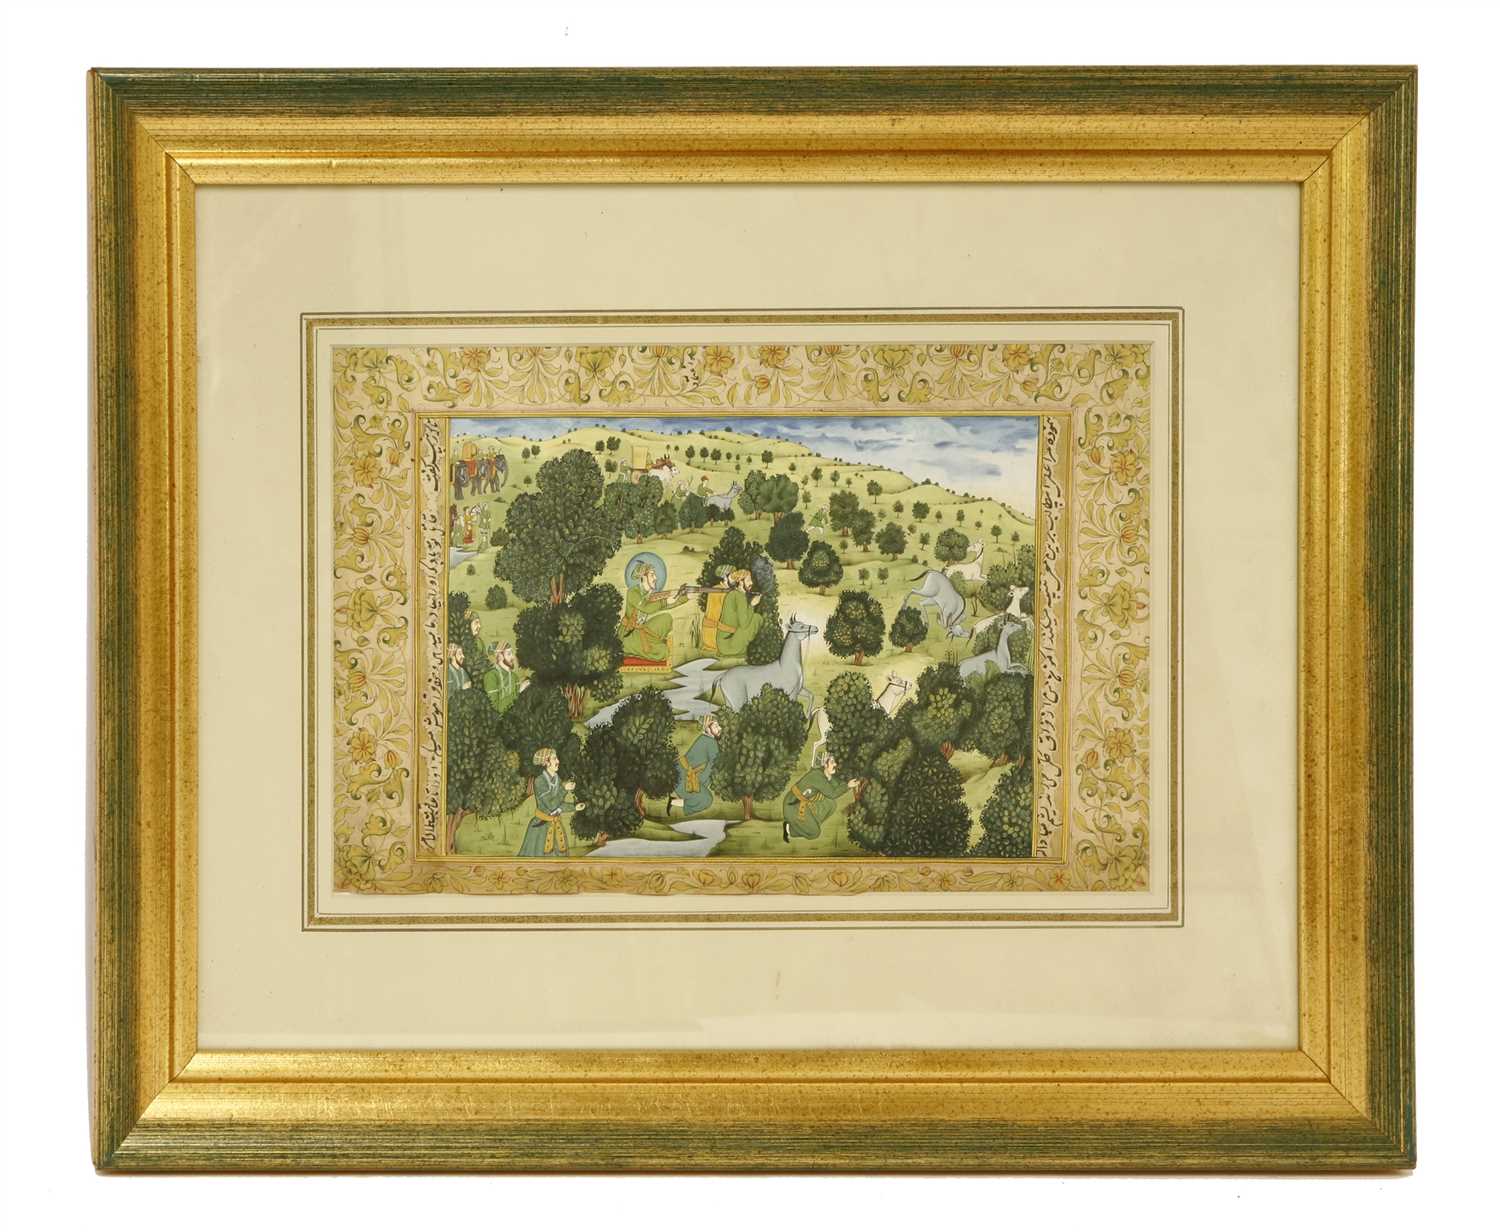 Lot 152 - An Indian Mughal painting